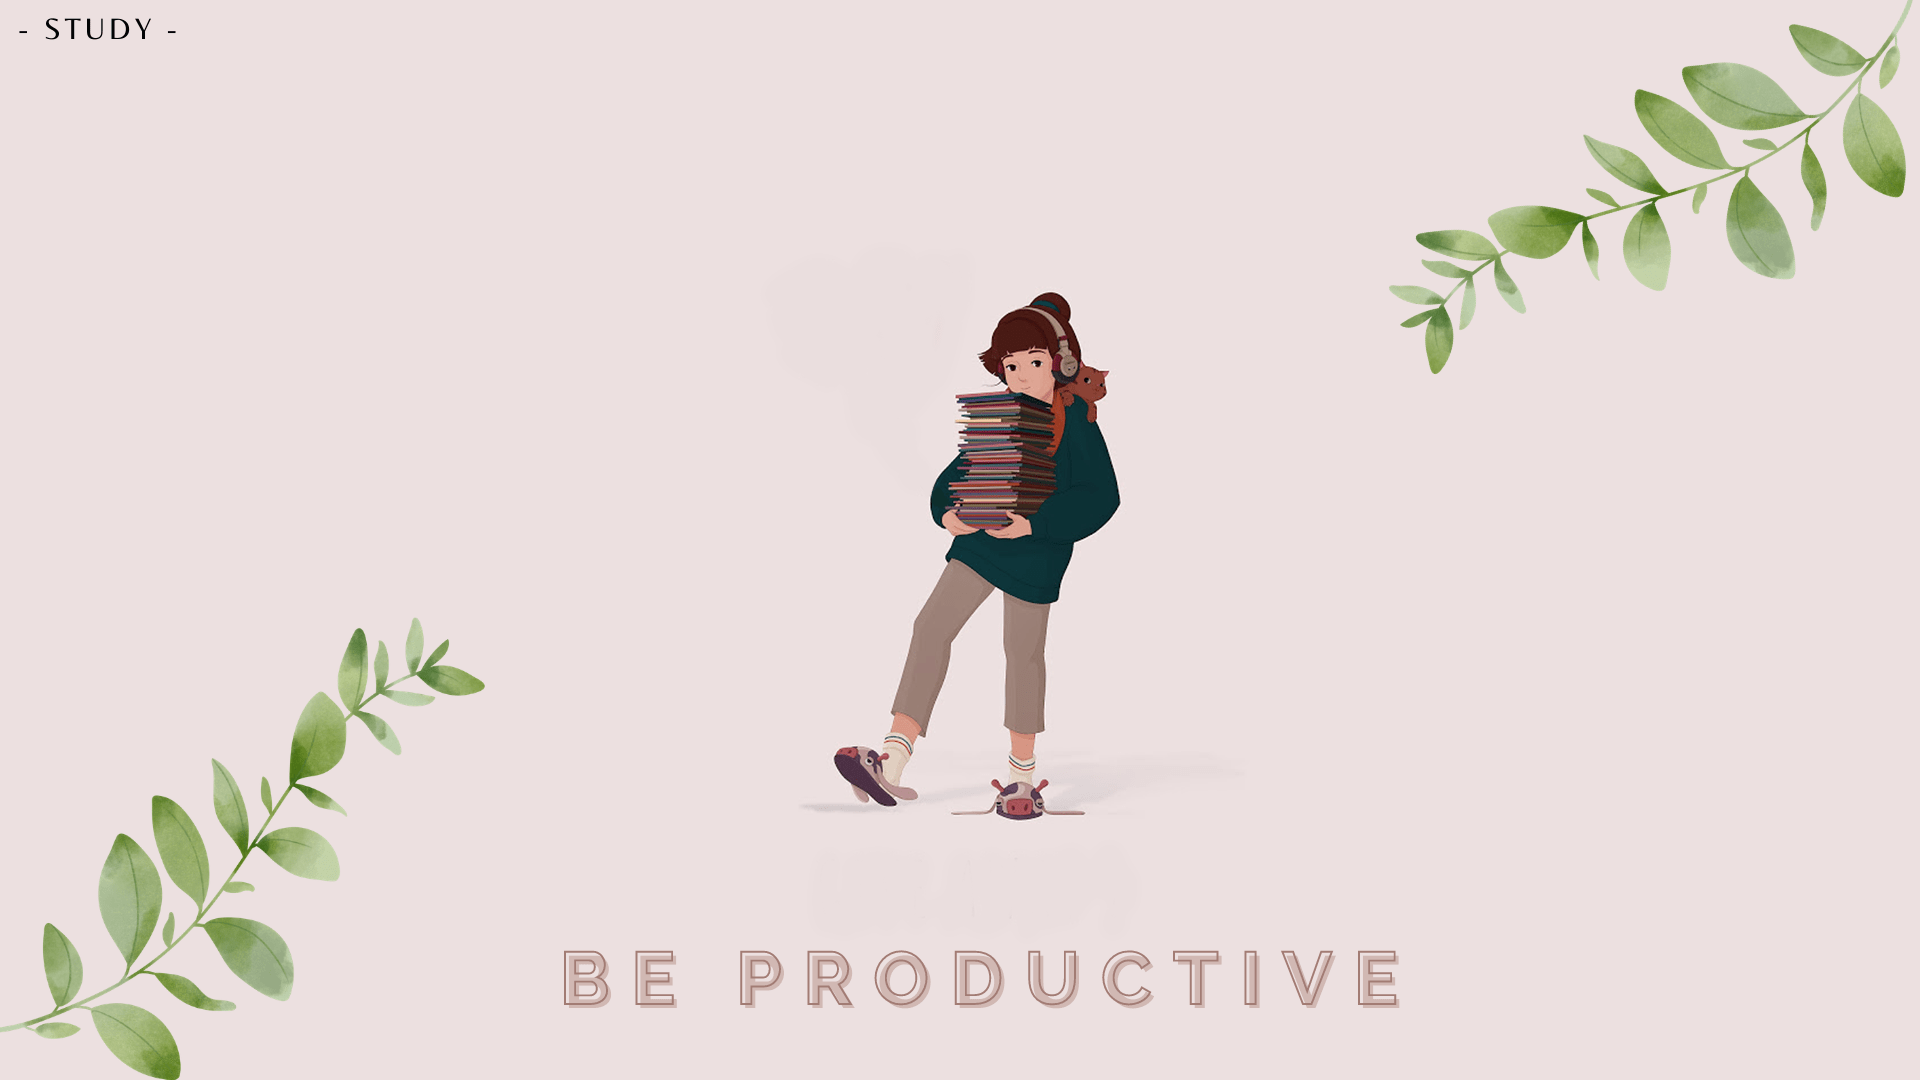 Be productive wallpaper with a girl carrying books - Study